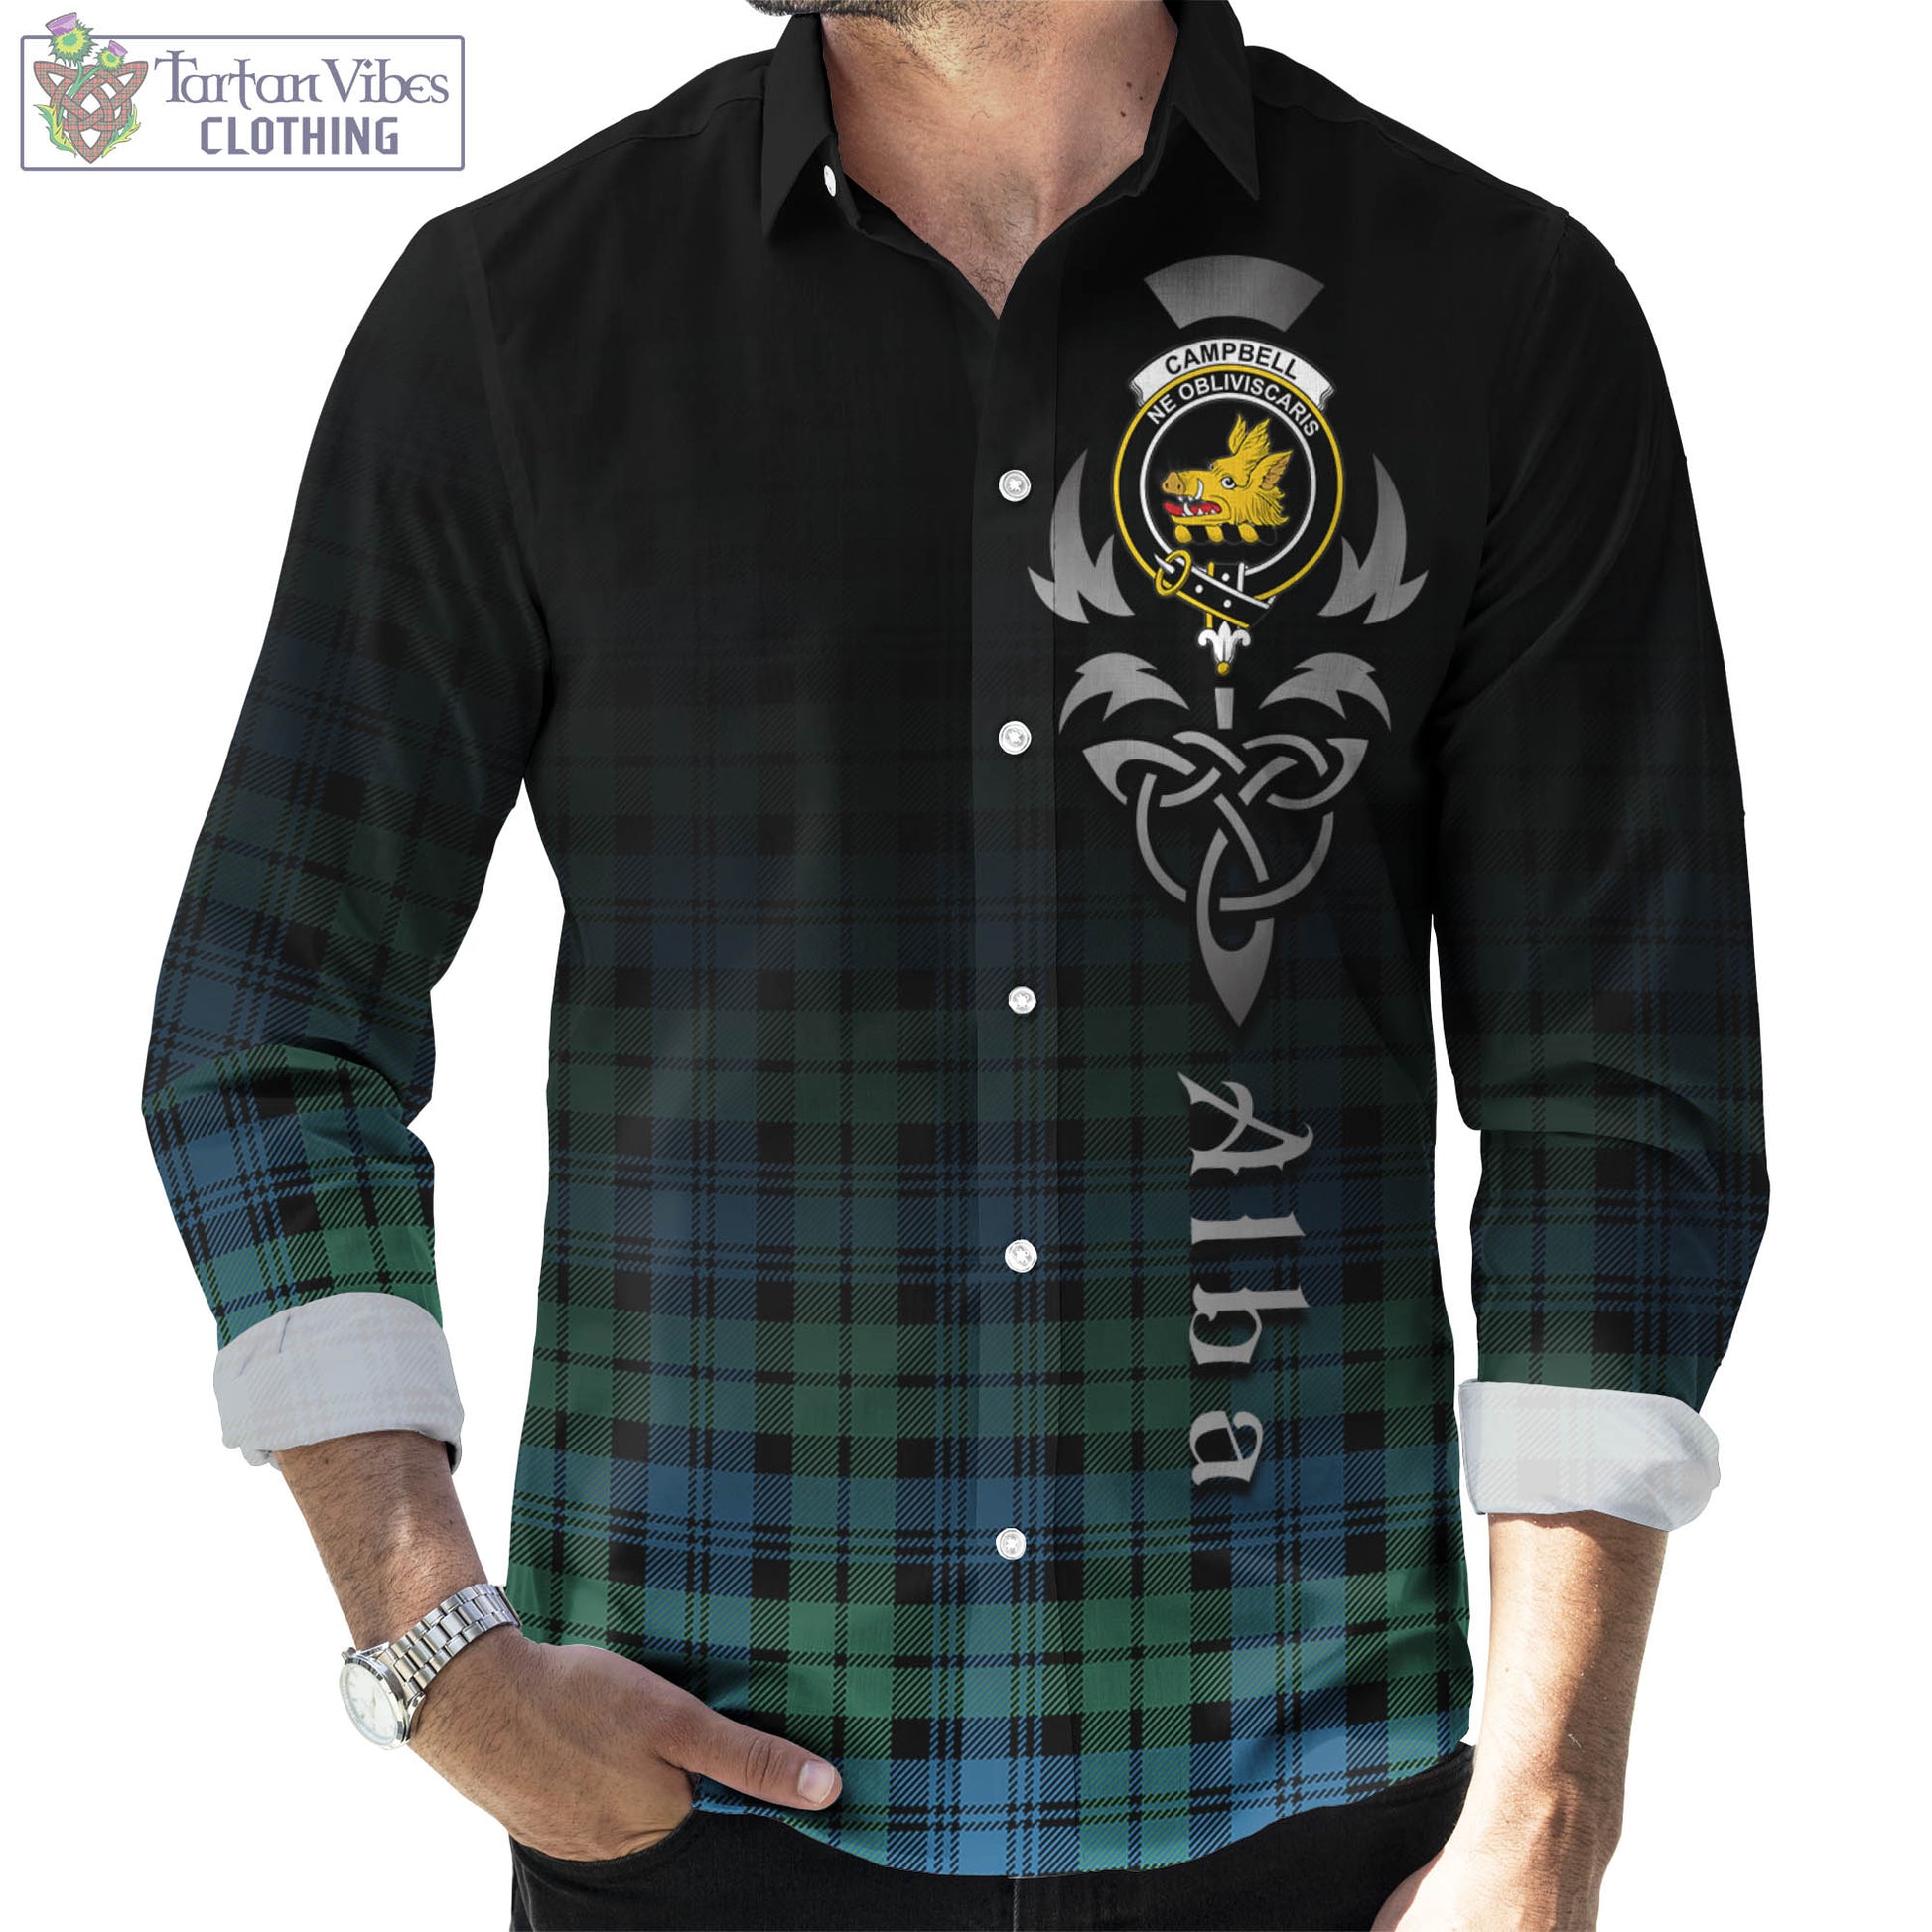 Tartan Vibes Clothing Campbell Ancient 01 Tartan Long Sleeve Button Up Featuring Alba Gu Brath Family Crest Celtic Inspired